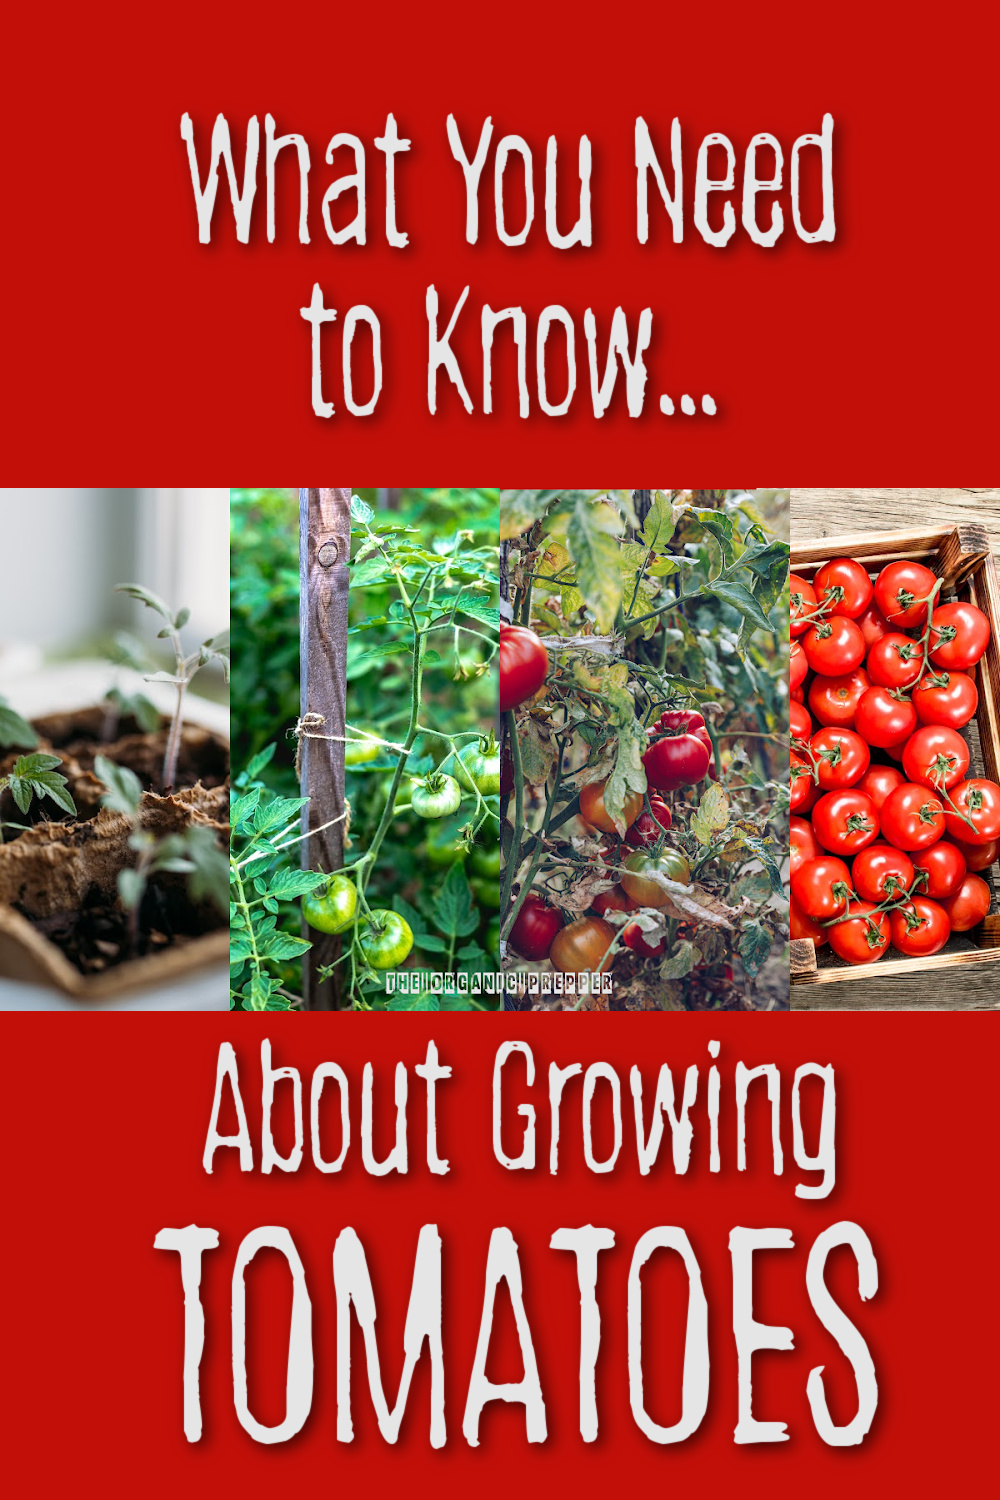 What You Need to Know About Growing Tomatoes